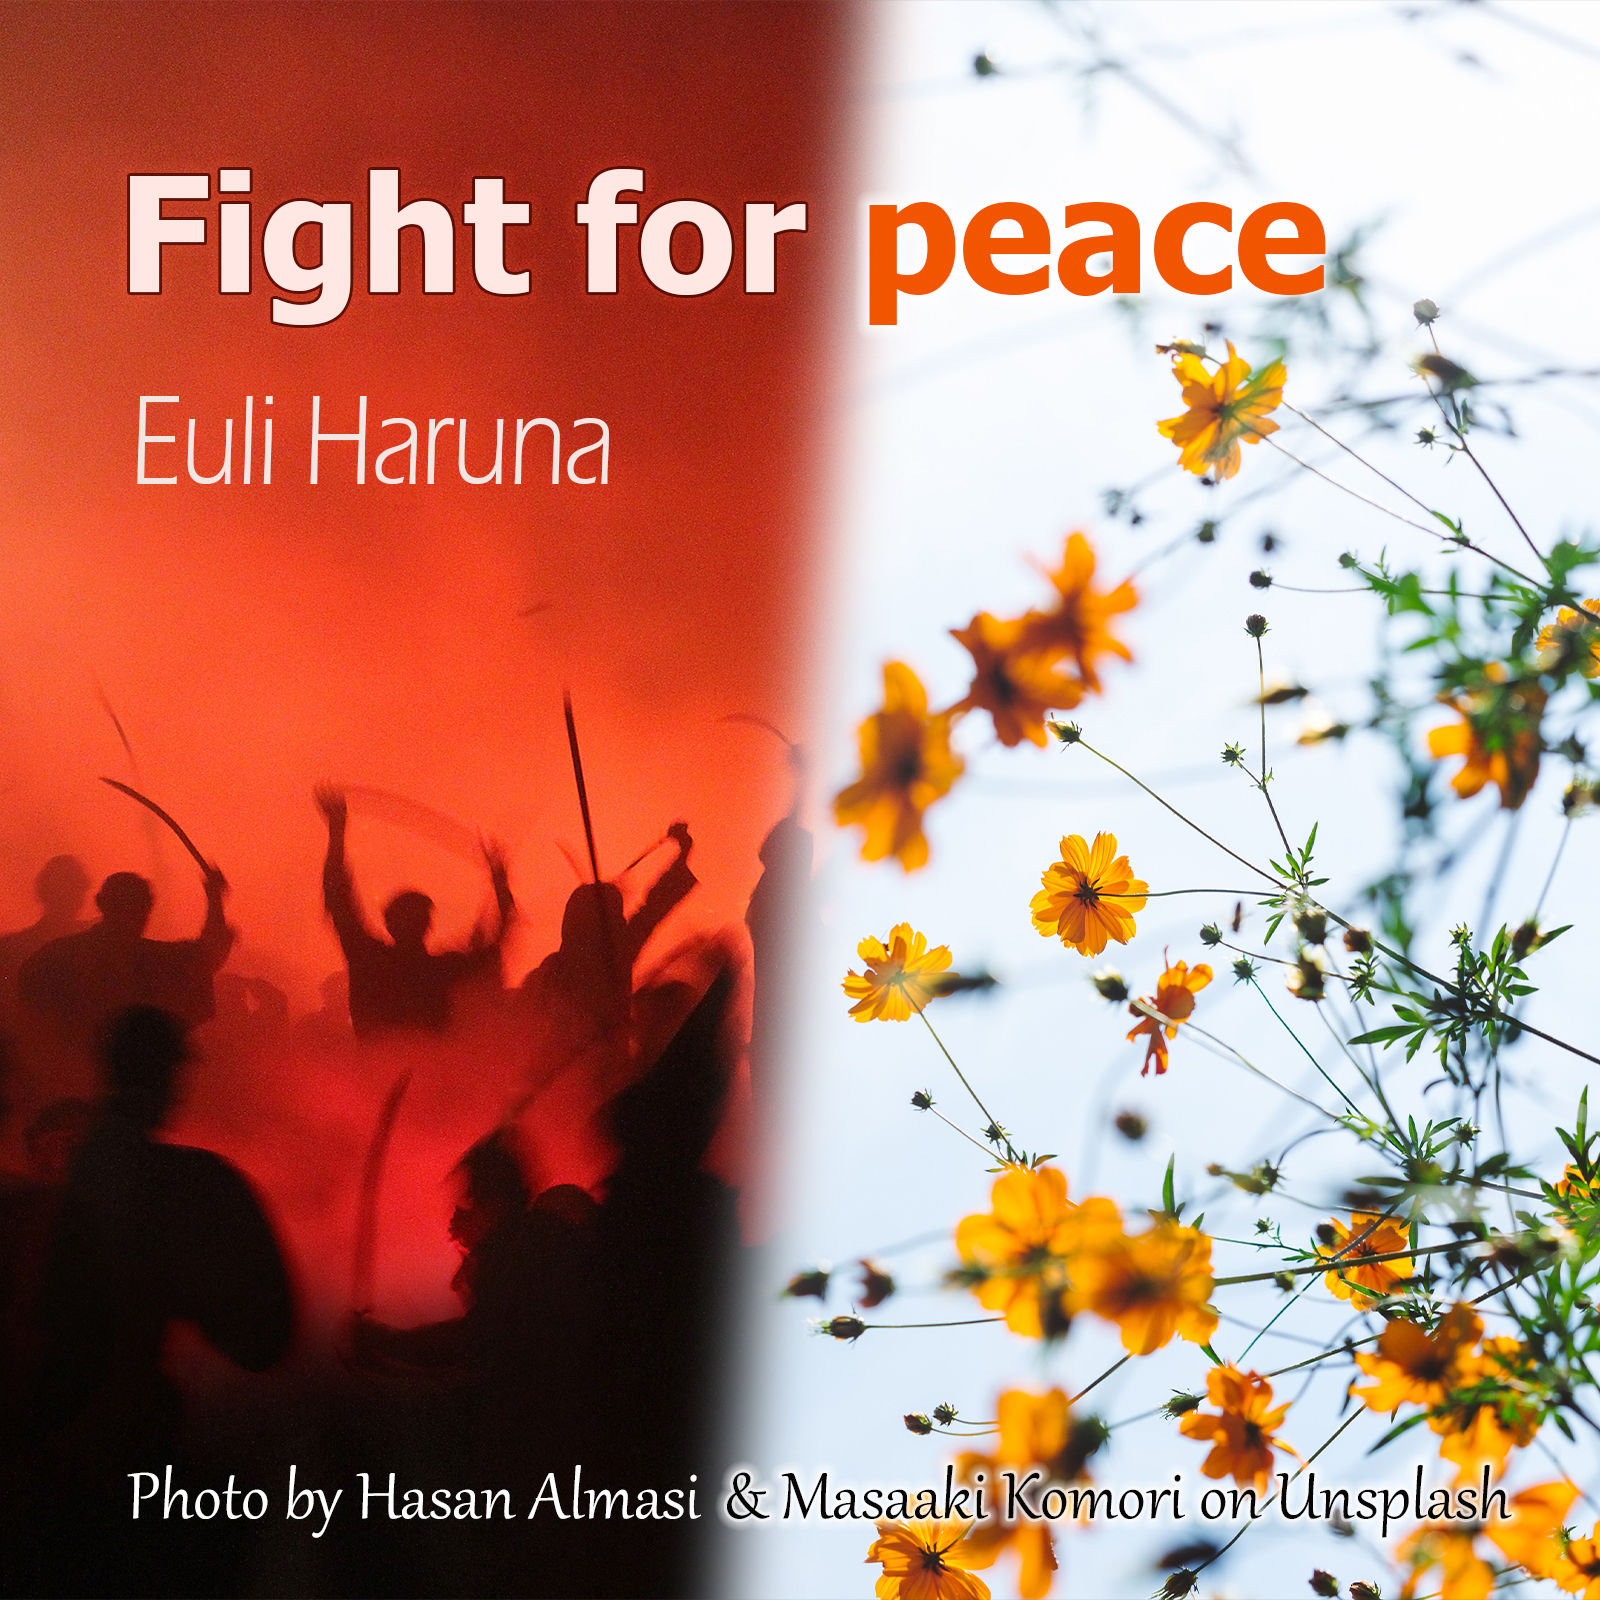 Fight for peace